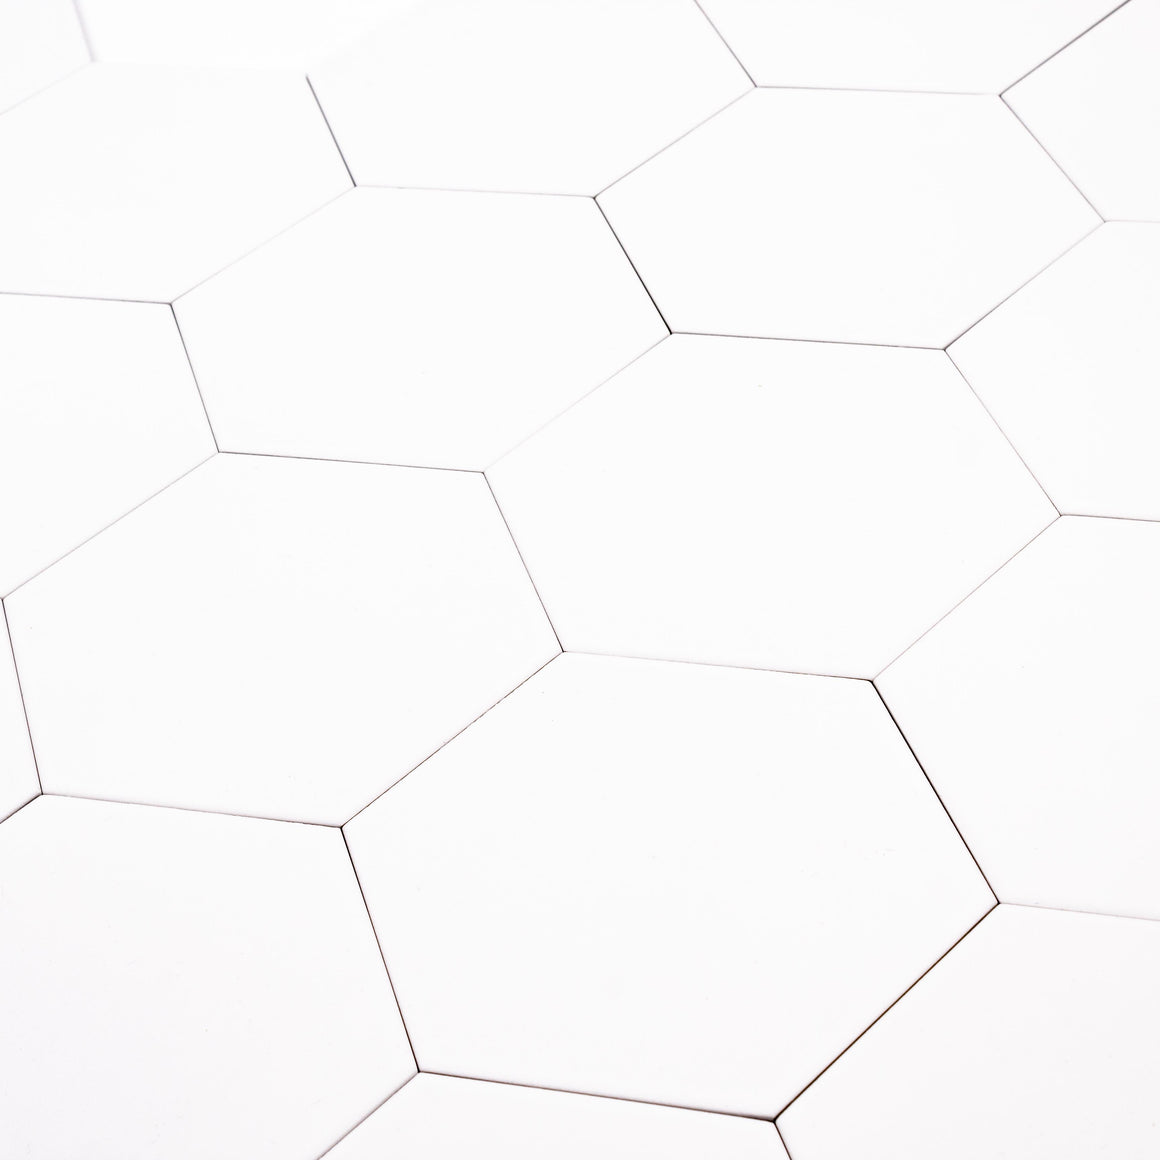 Good Vibes White White modern matte porcelain hexagon tile for residential and commercial bathroom and kitchen floor and wall imported from Spain, Cevica Good Vibes White available from TilesInspired Canada's Online Tile Store delivering across Ontario and Quebec, including Toronto, Montreal, Ottawa, London, Windsor, Kitchener, Muskoka, Barrie, Kingston, Hamilton, and Niagara decoration idea